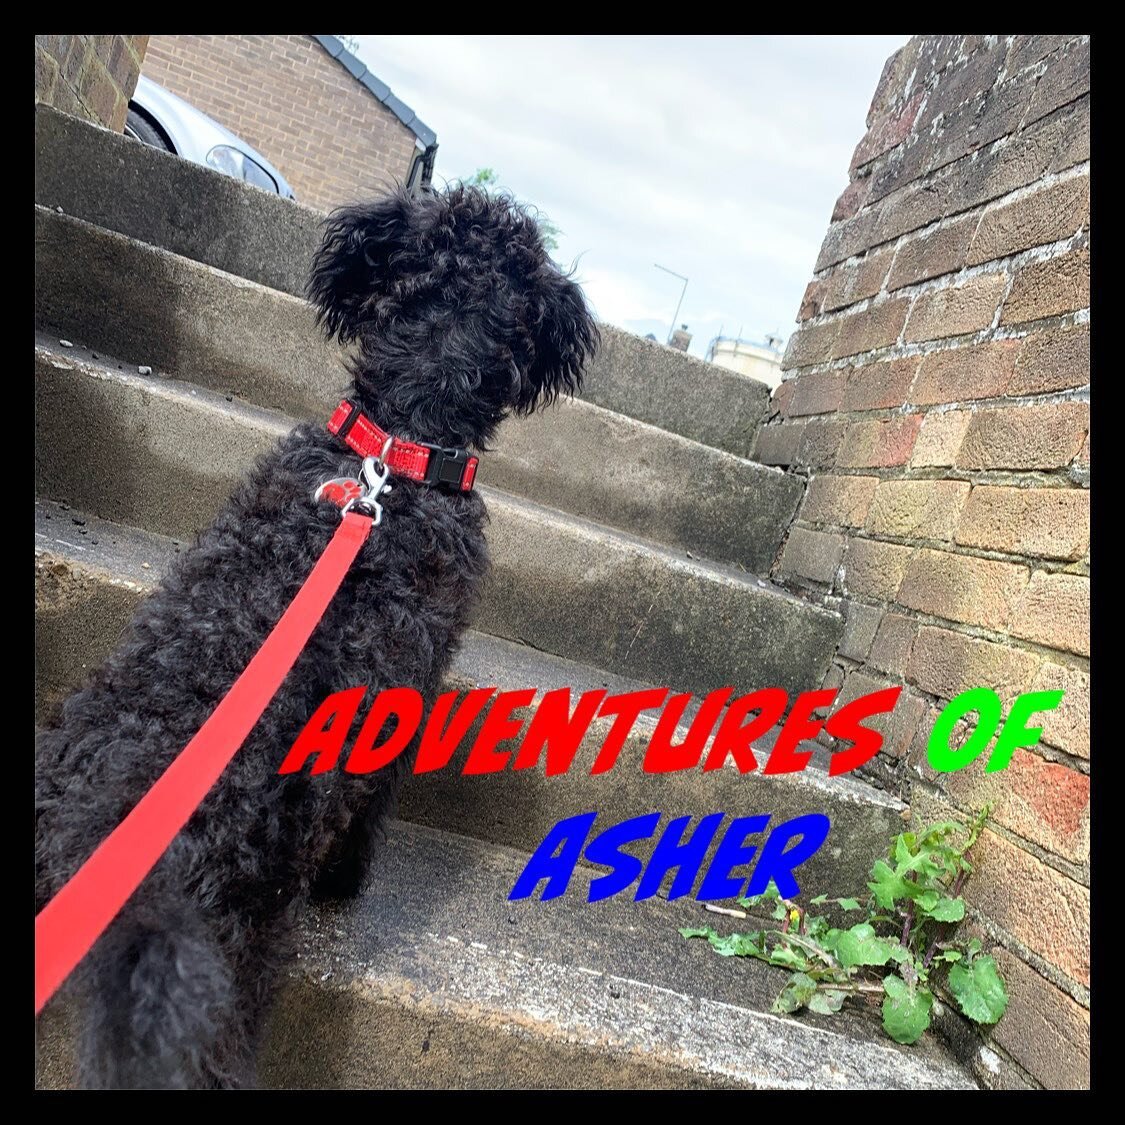 This week Asher, has decided that the black bird 🦅 needs to be chased (im not afraid of you), the leafs 🍃 that blow are good to chase also. The cemetery isn&rsquo;t scary 😟 (if lexi and oli come with me) 💕. # Also he&rsquo;s found a receipt for a